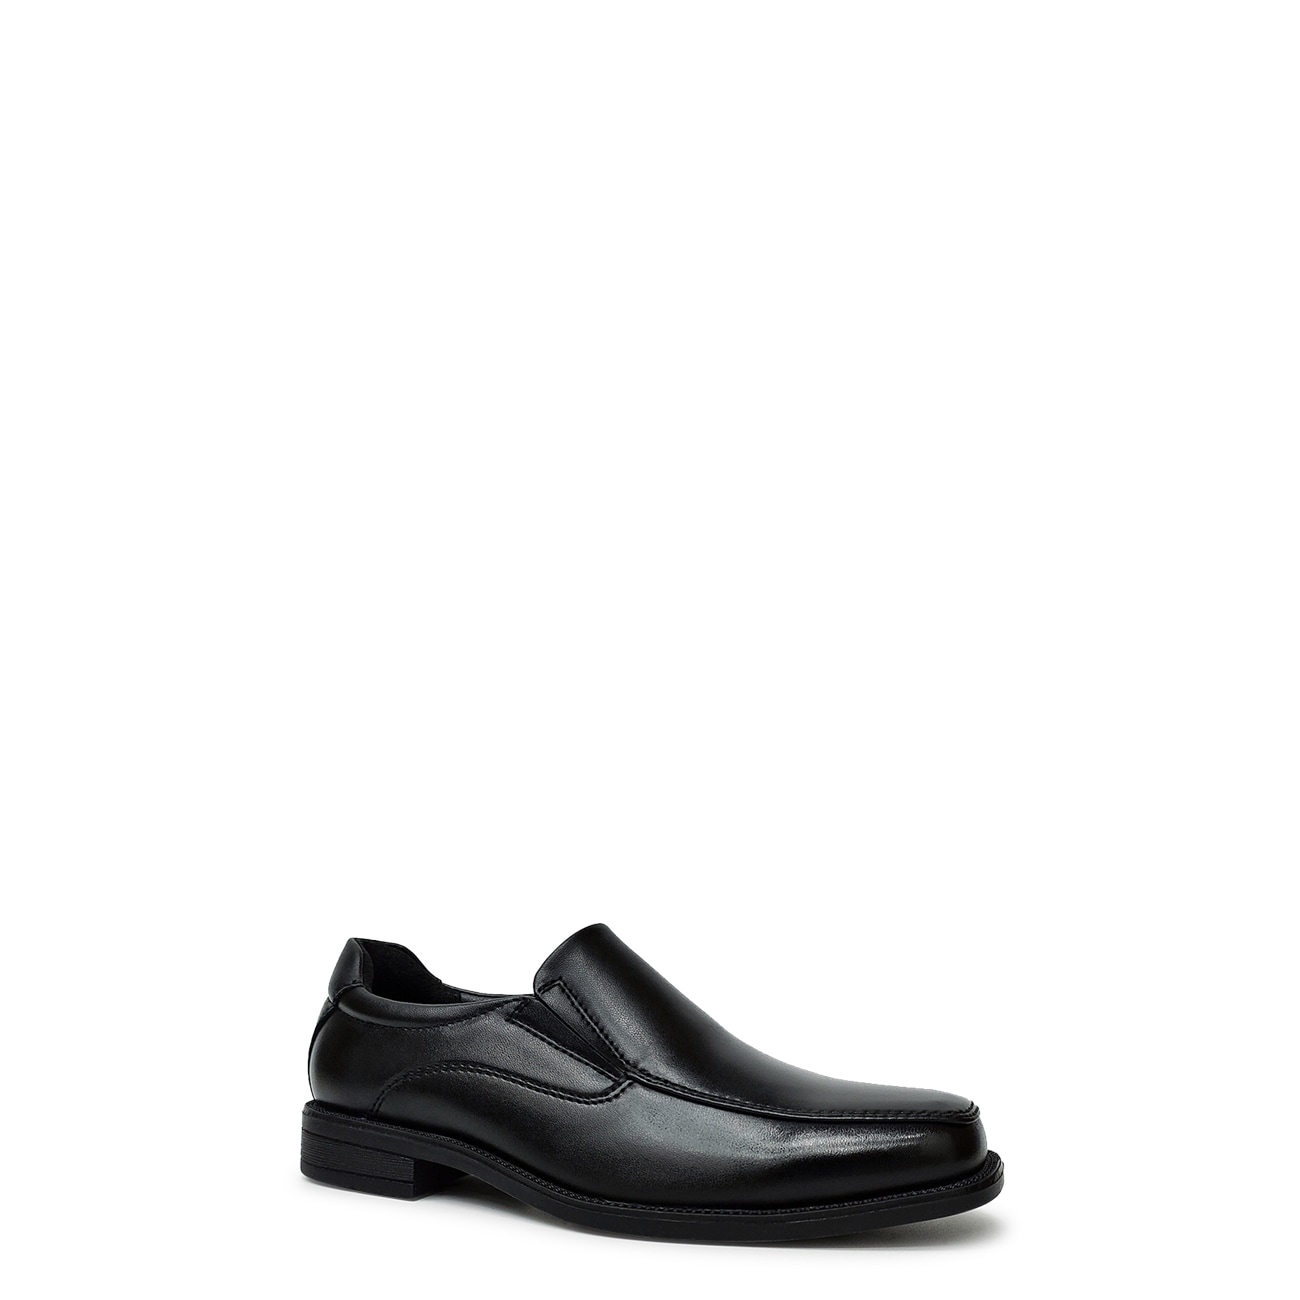 Youth Boys' A202272-03 Loafer